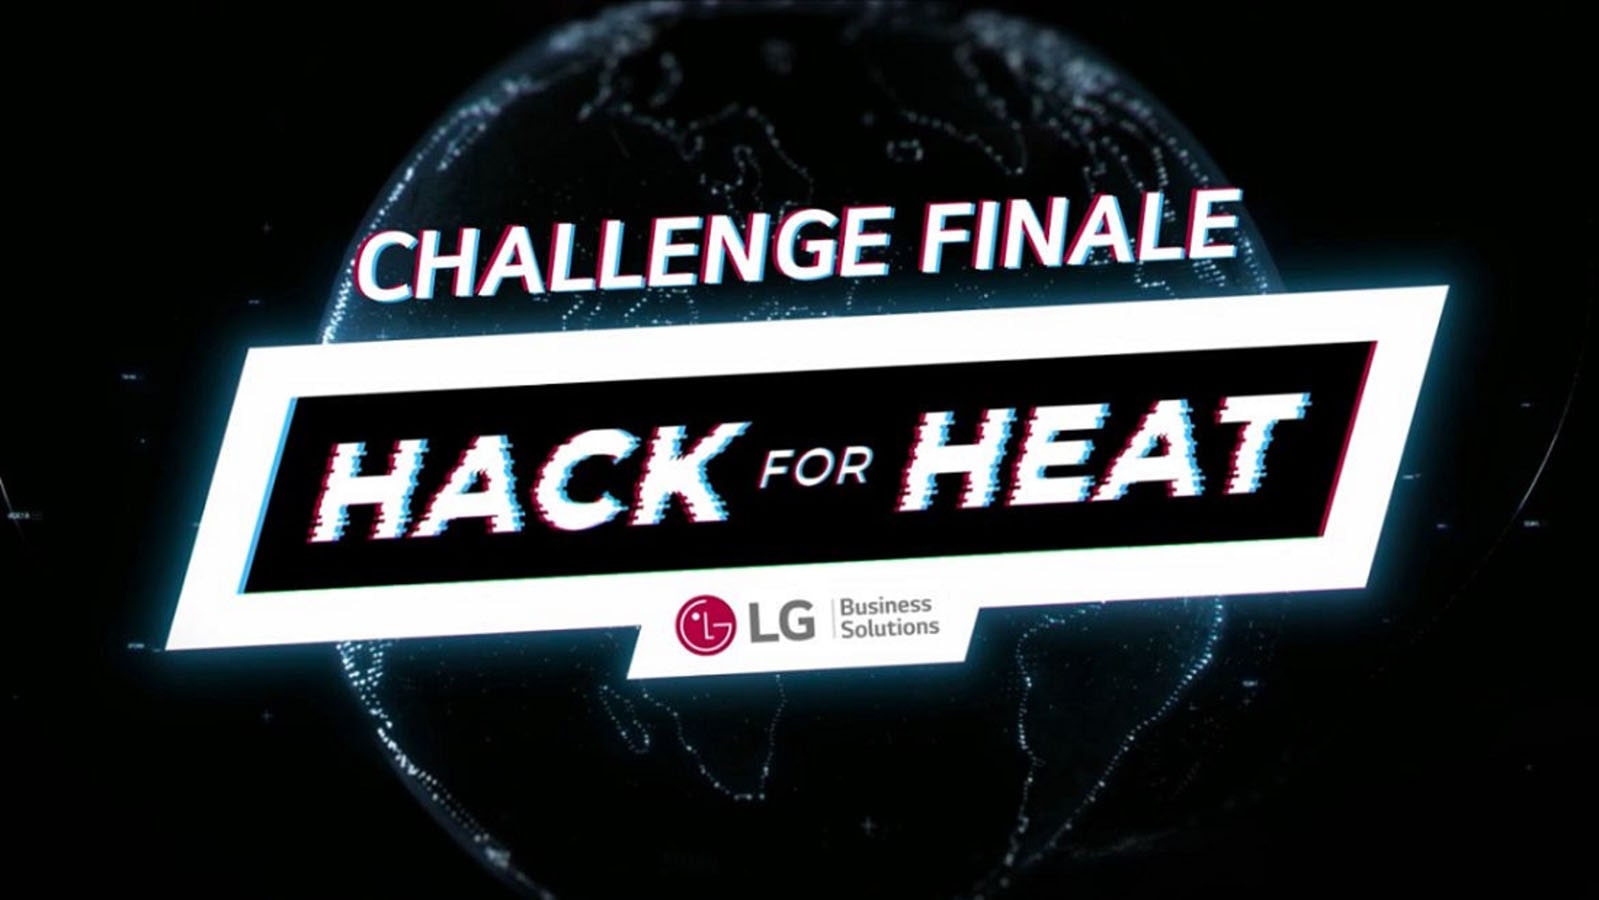 Hack for Heat reveals LG’s strong commitment to innovation and firm belief in the power of young talent to shape the future of HVAC